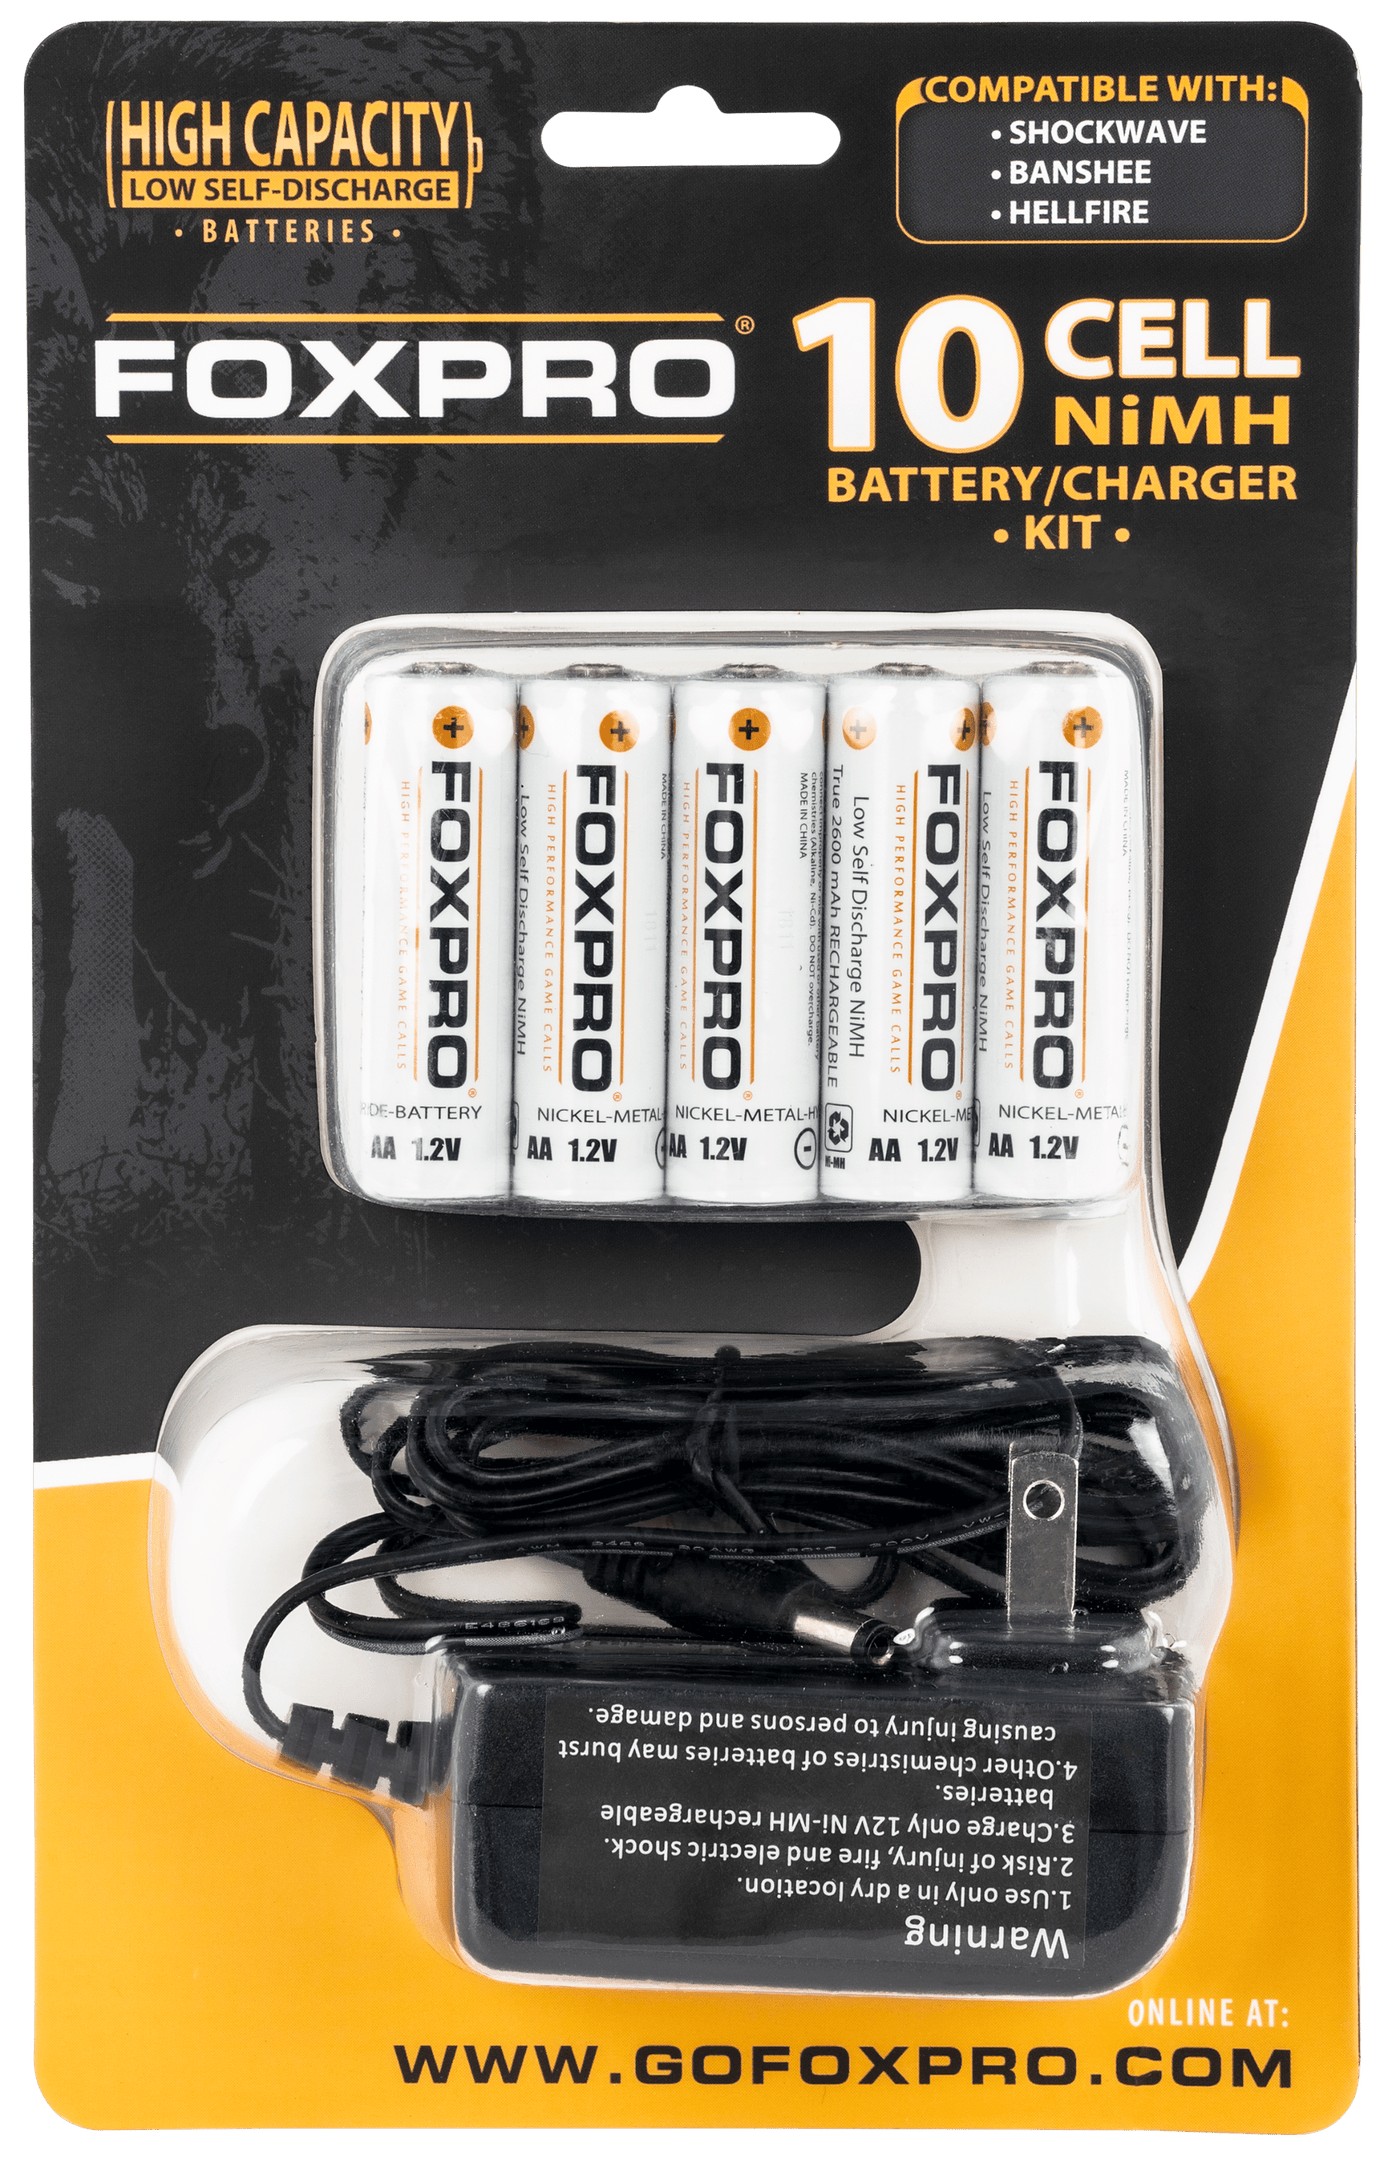 Foxpro Foxpro Nimh Charger 3, Foxpro  Swnimh         Nimh Charger 3 Accessories